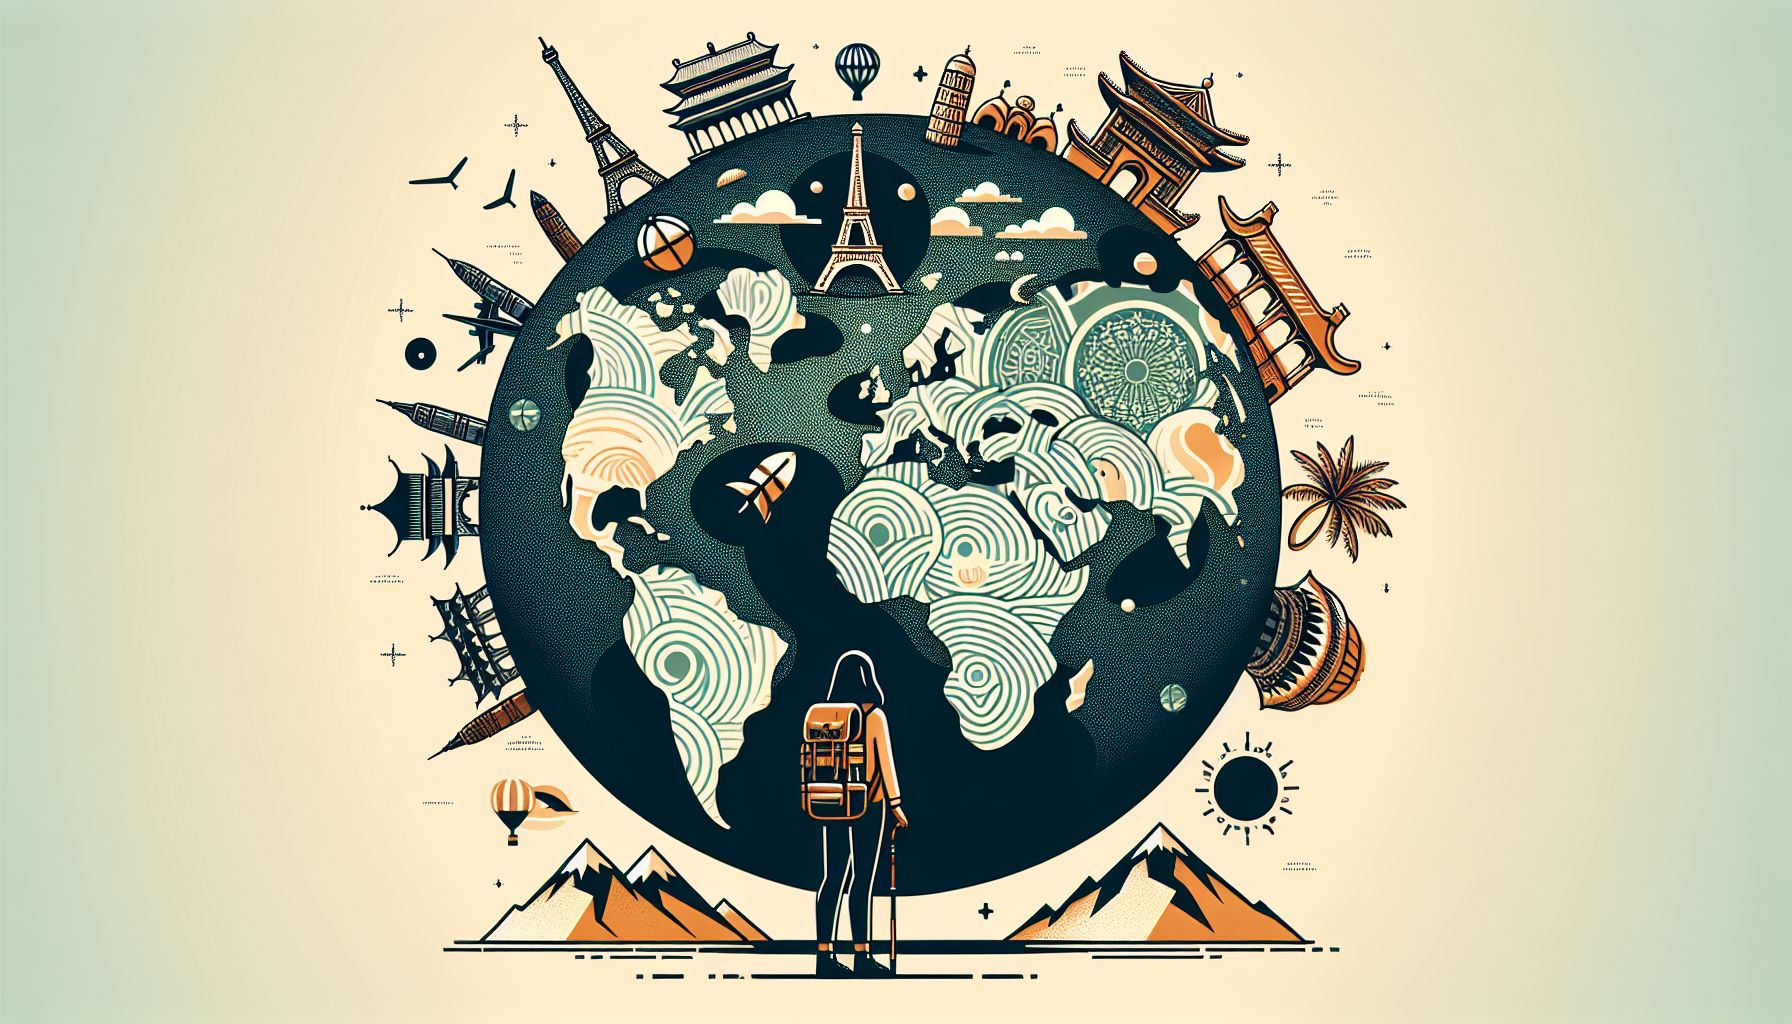 A Journey Through Global Travel Experiences